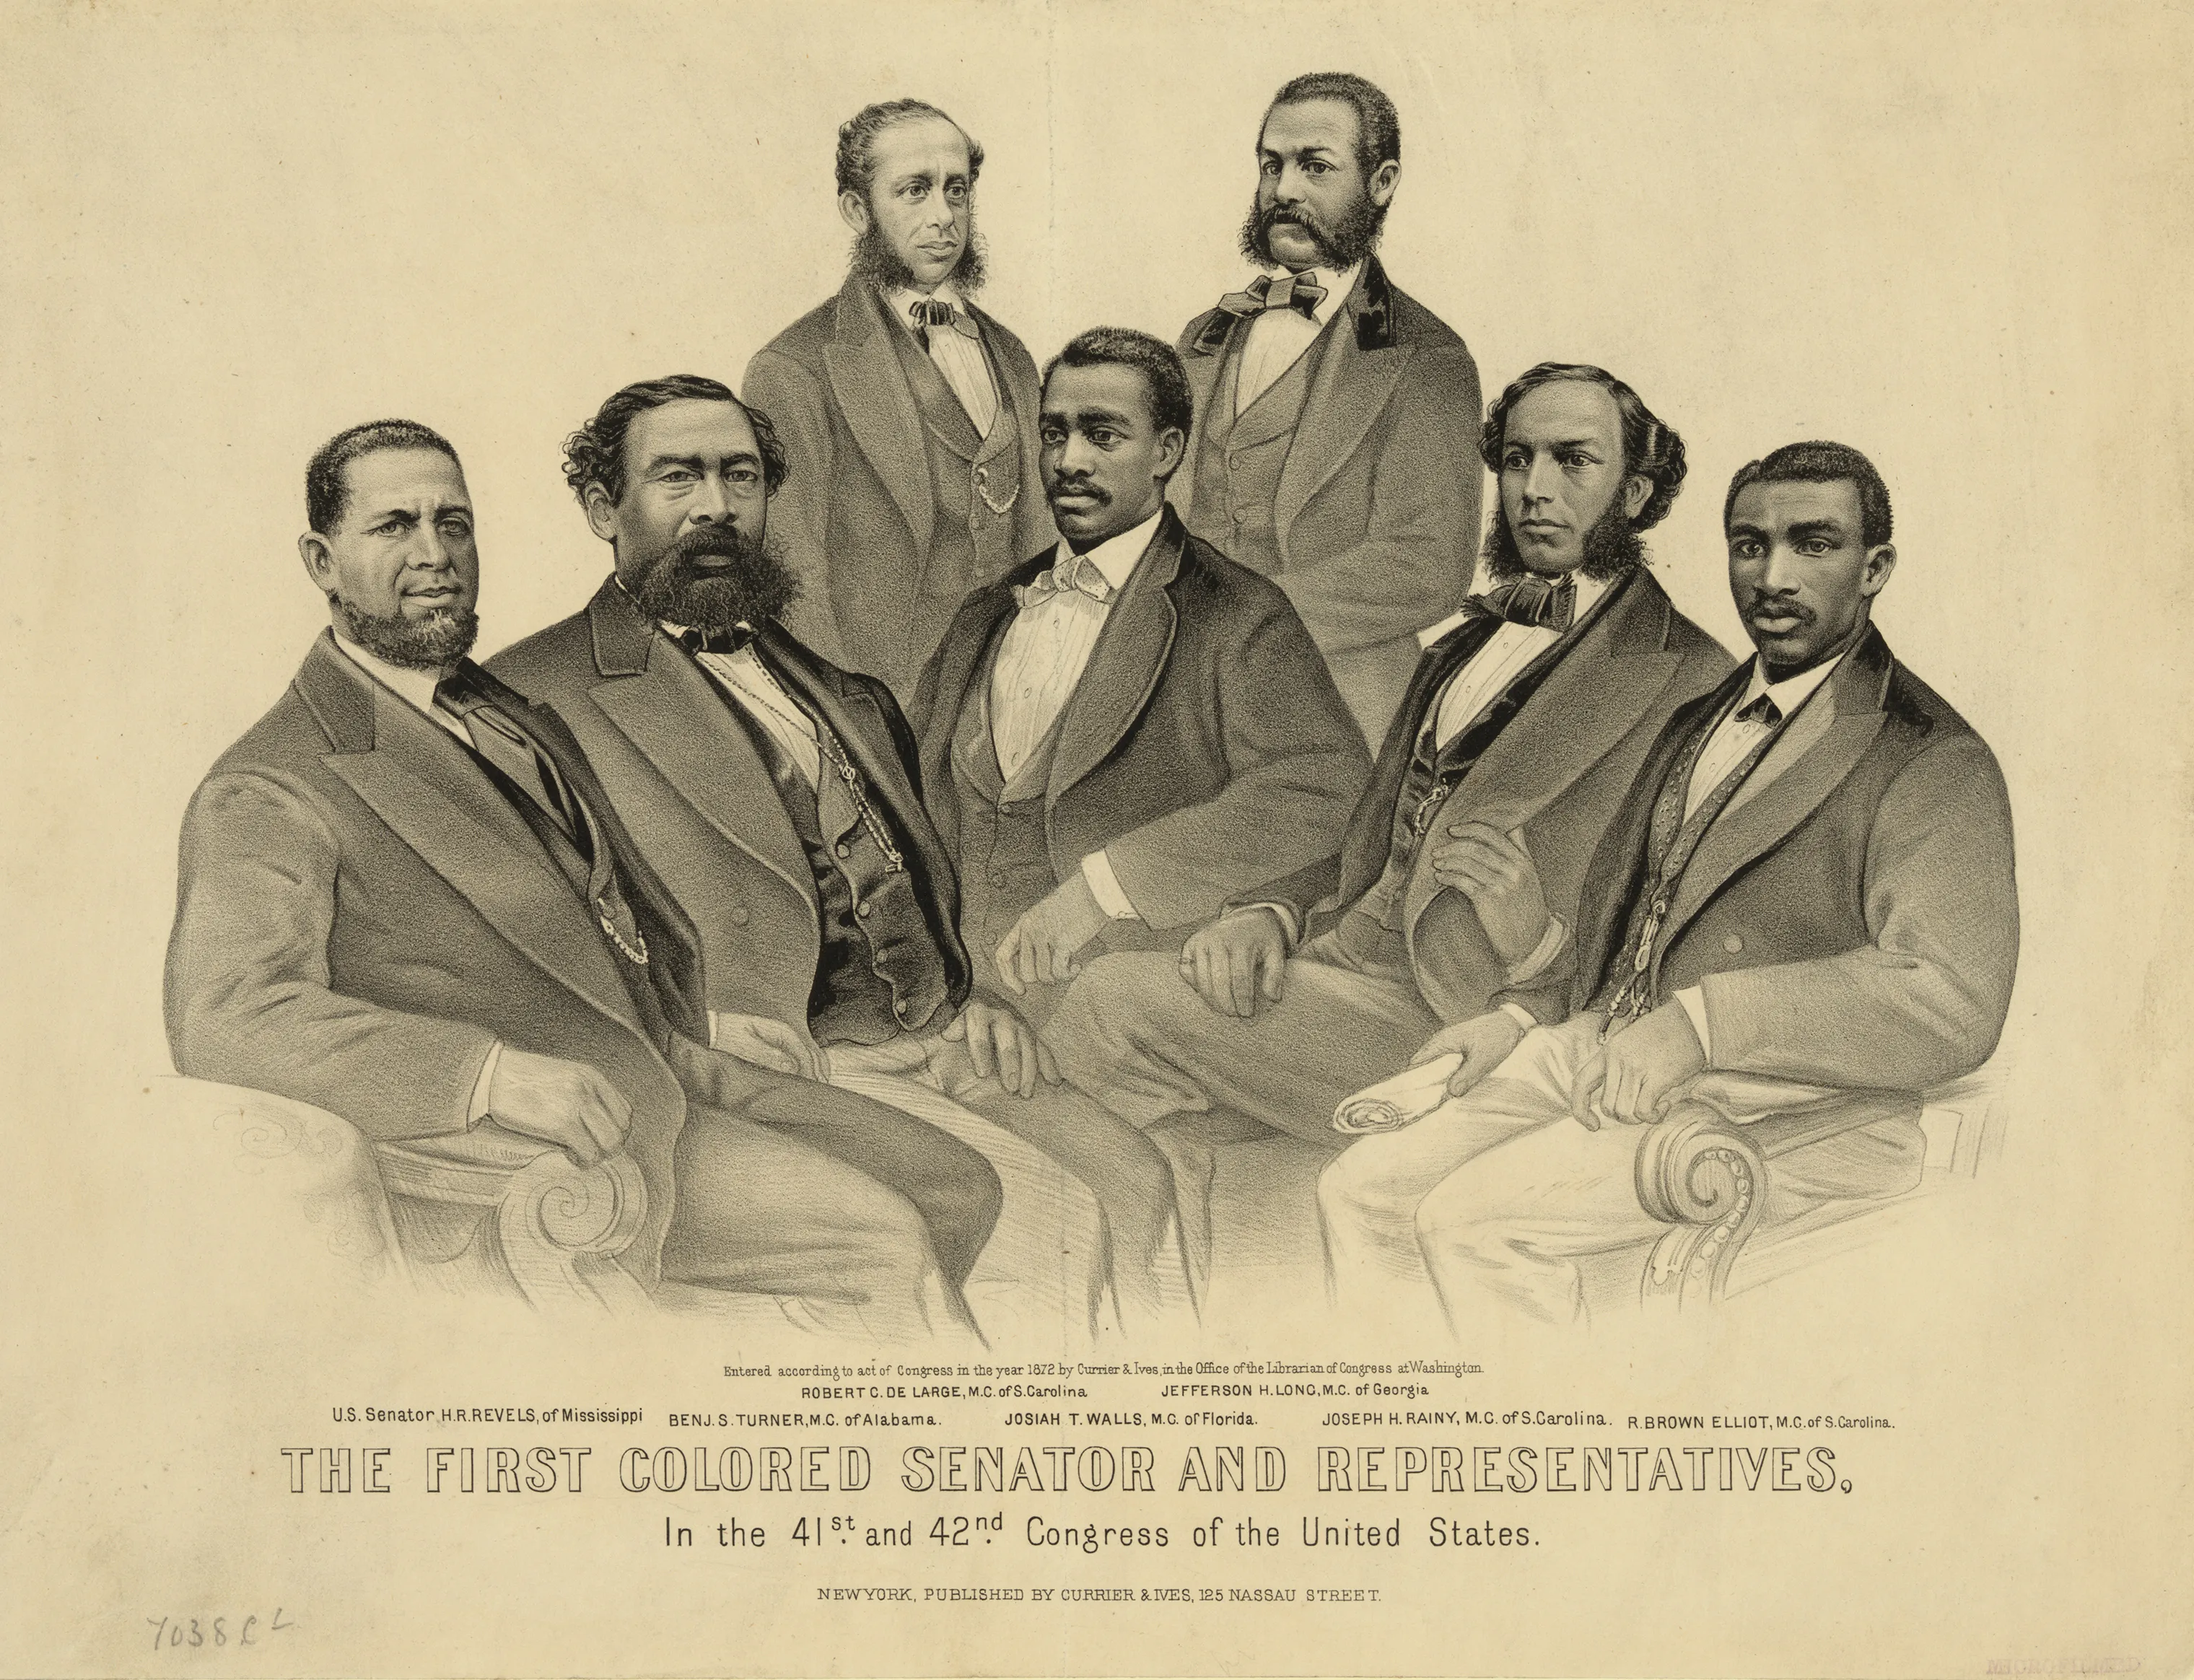 illustration of the first African American Senator and Congressmen